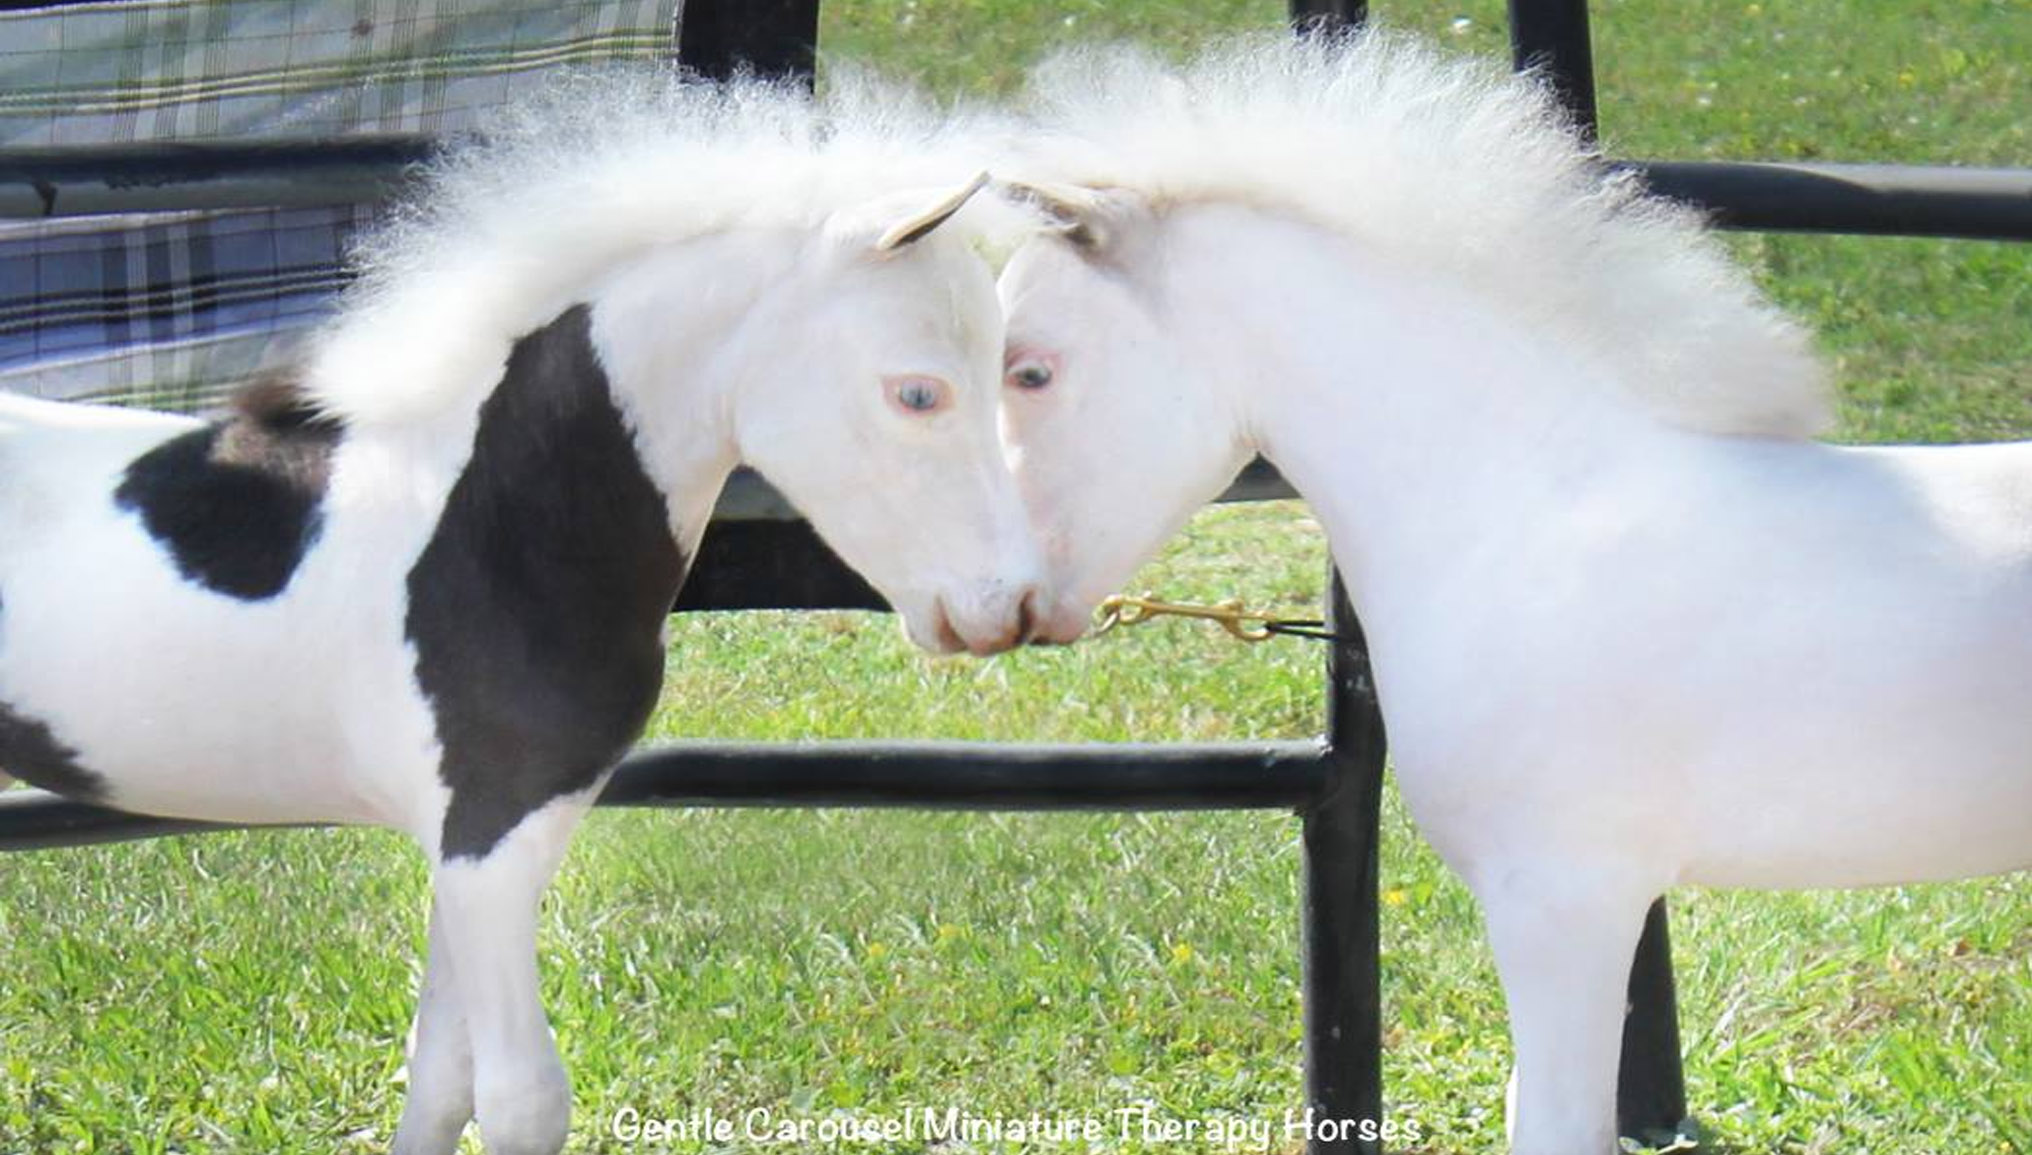 Foals are adorable and these foals are off the chart adorable @Gentle Carousel Miniature Therapy Horses